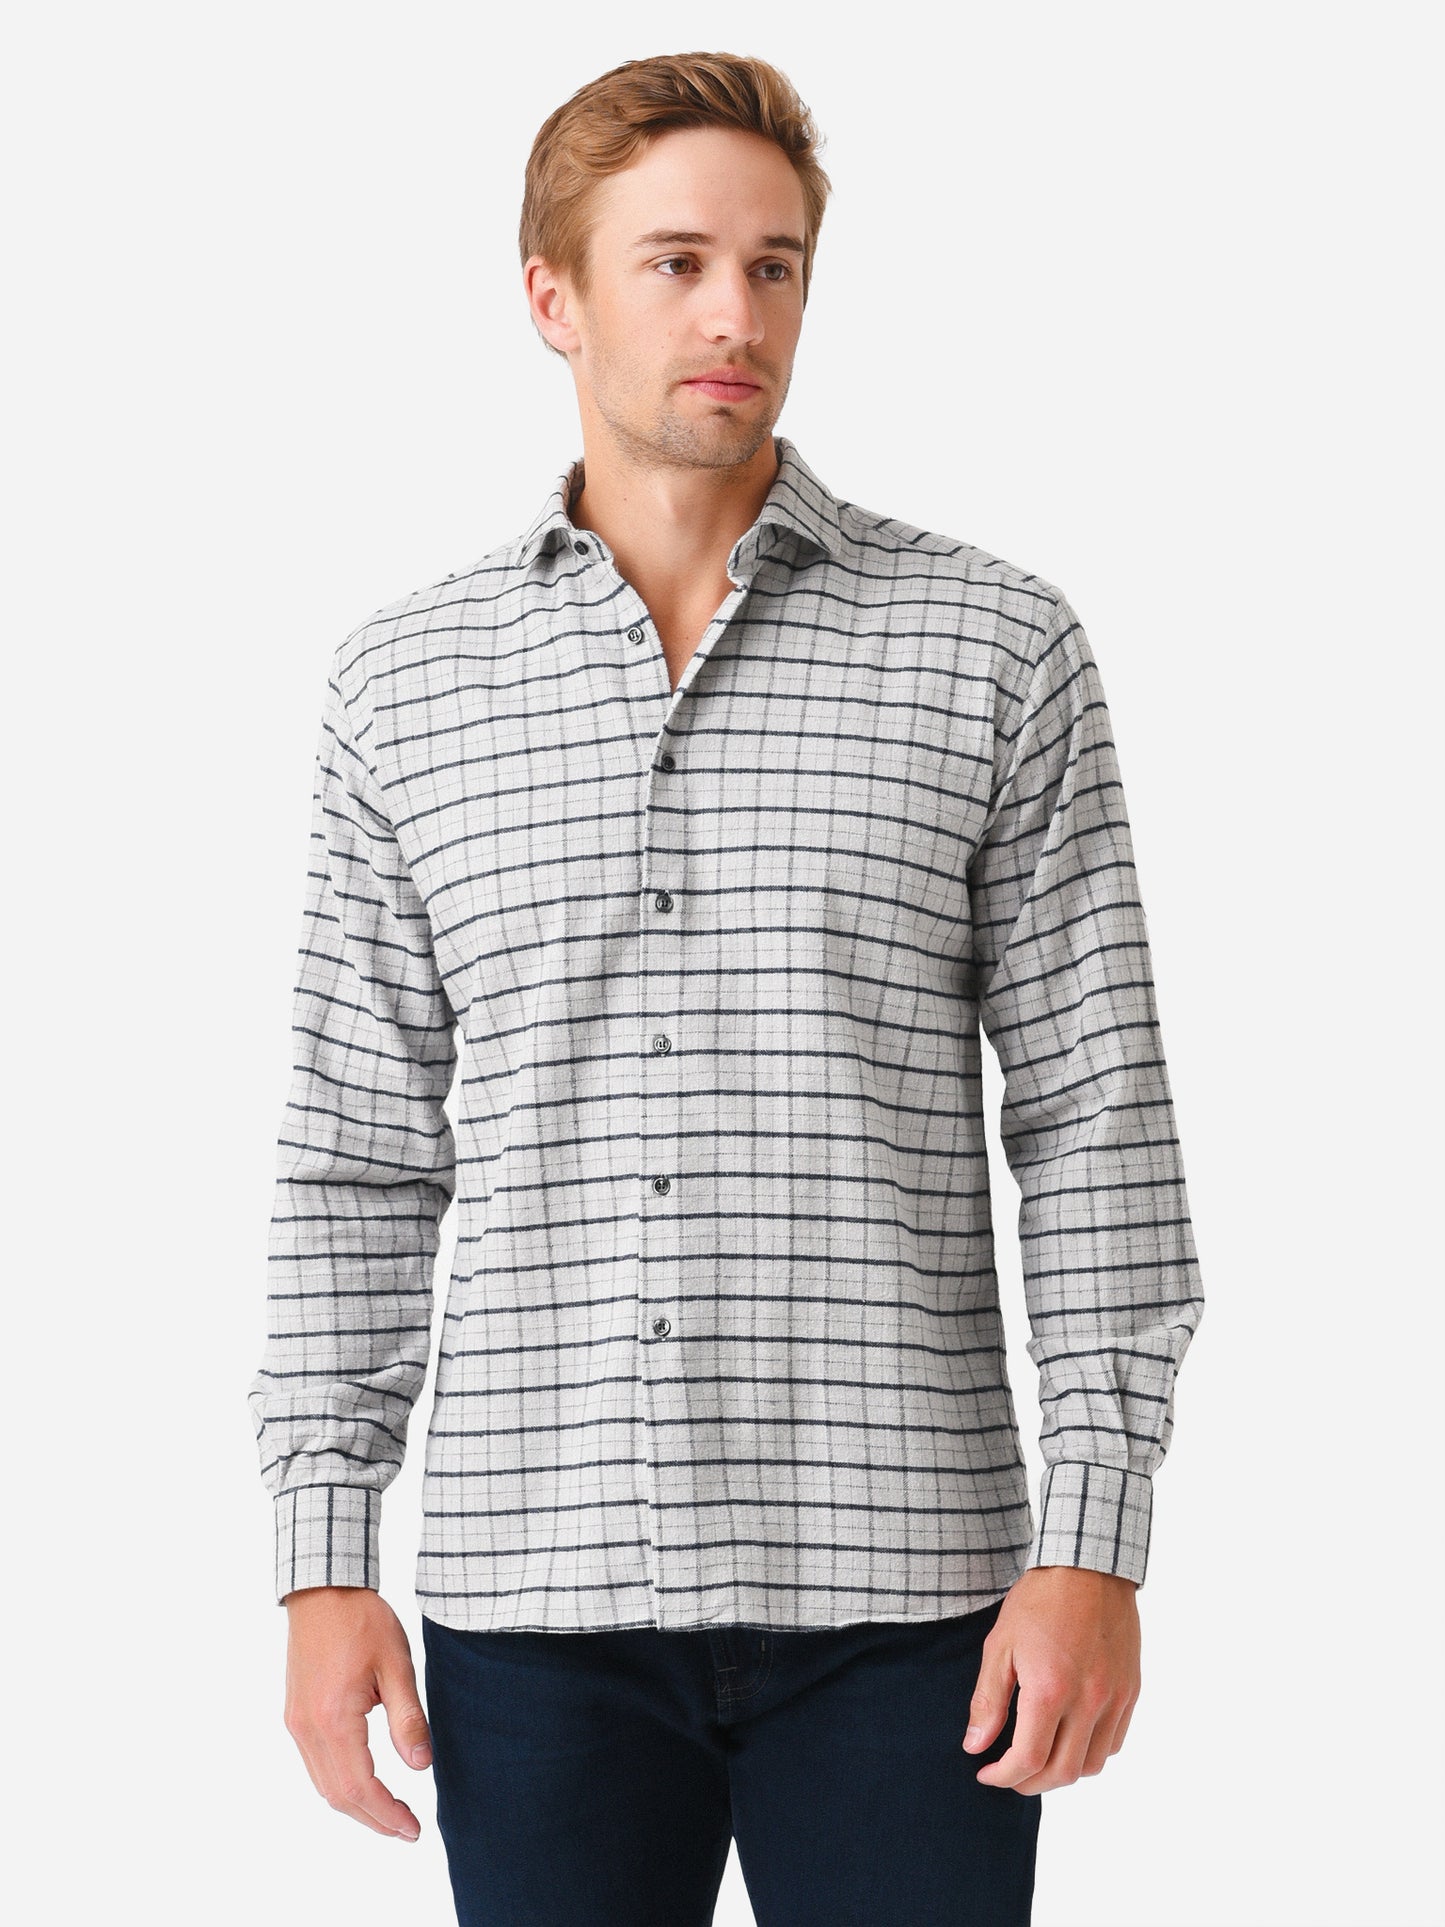 Miller Westby Men's Ty Button-Down Shirt